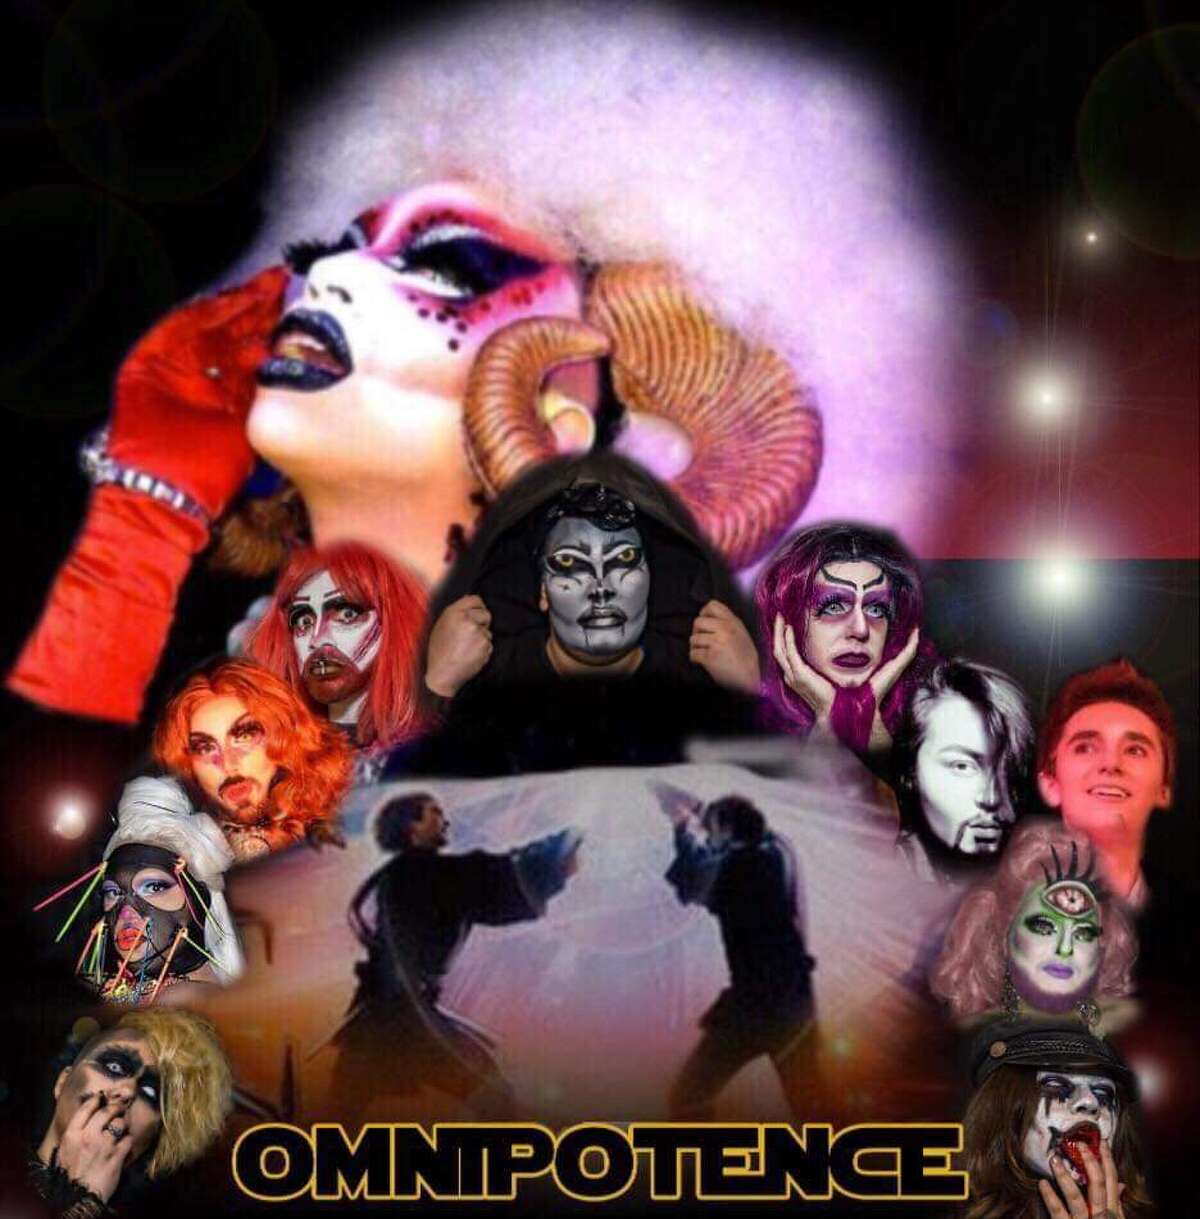 WebHouse Omnipotence is a bi-monthly themed show hosted by Paradox Rei. Located at WebHouse – 320 Blanco Rd, Omnipotence is a #alldragisvalid show that celebrates all forms of drag artists. The last show brought in Xochi Mochi from Season 1 of Dragula for a Star Wars Themed night